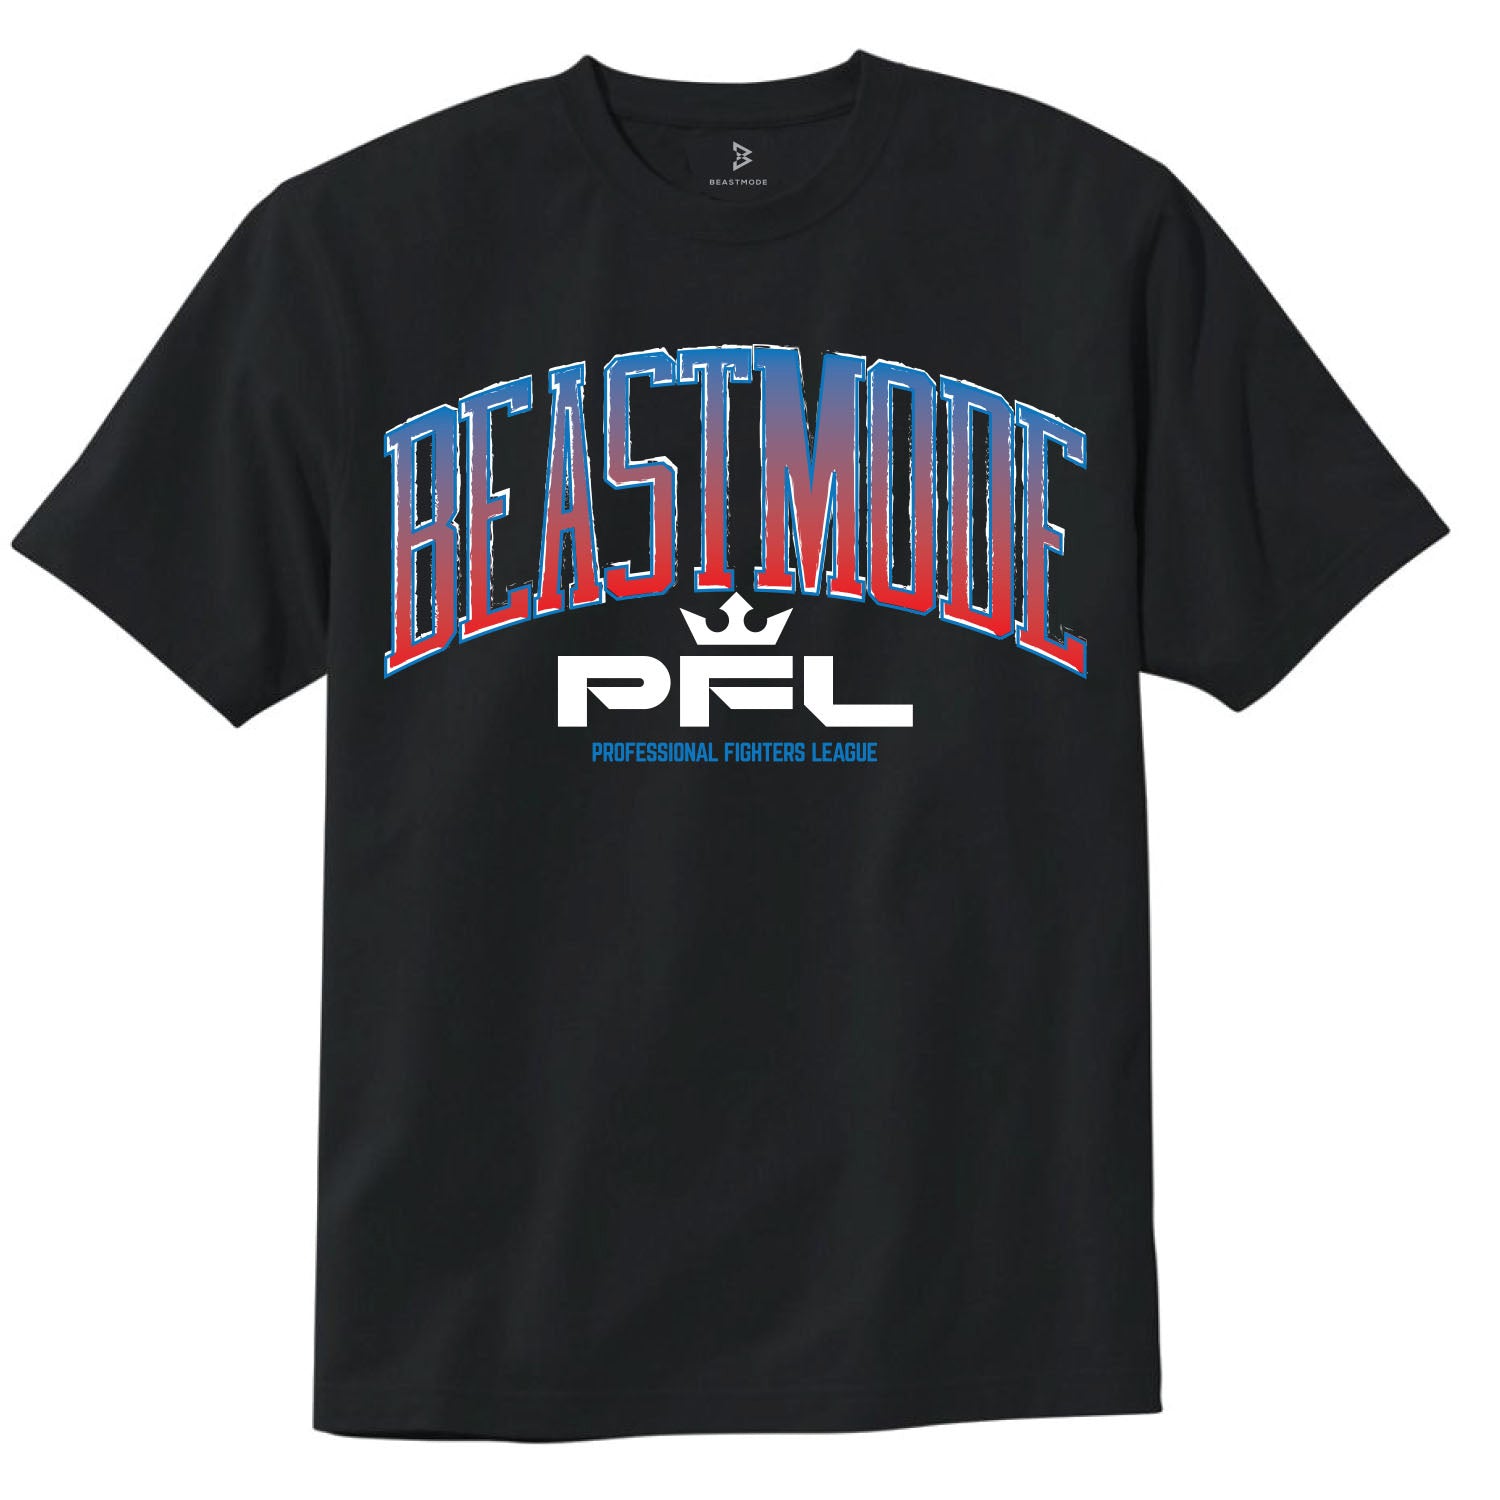 PFL x Beastmode Arch T-Shirt in Black - Front View